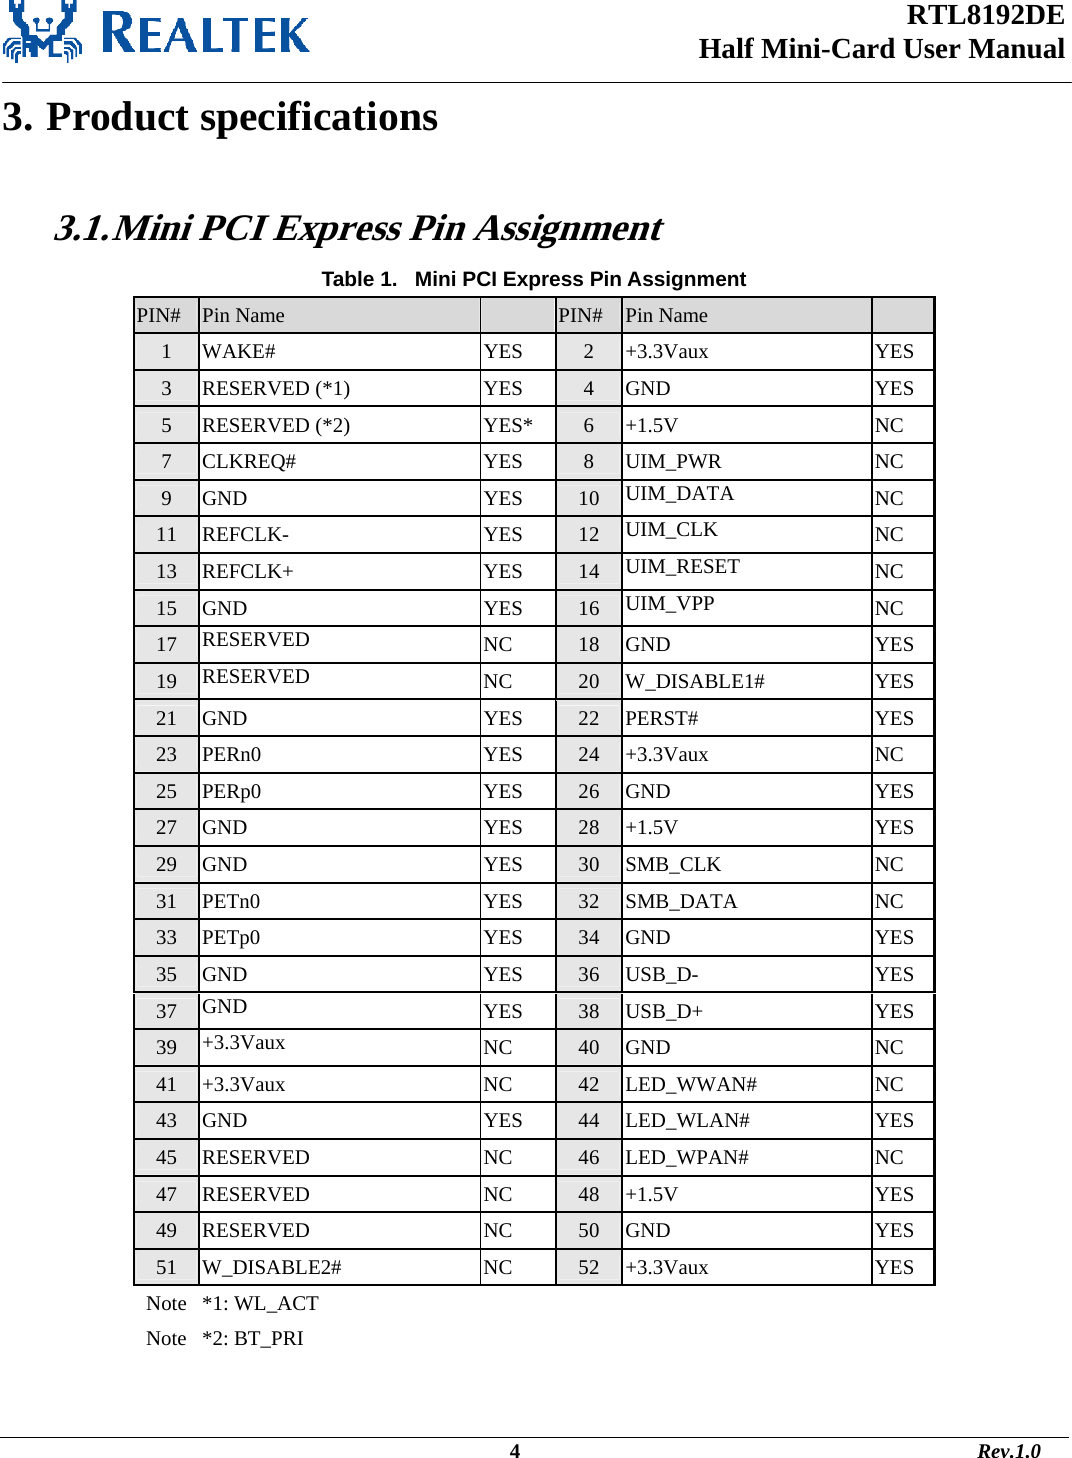 RTL8192DE Half Mini-Card User Manual   3. Product specifications  3.1. Mini PCI Express Pin Assignment Table 1.   Mini PCI Express Pin Assignment PIN# Pin Name    PIN# Pin Name   1 WAKE# YES 2 +3.3Vaux YES 3 RESERVED (*1) YES 4 GND YES 5 RESERVED (*2) YES* 6 +1.5V NC 7 CLKREQ# YES 8 UIM_PWR NC 9 GND YES 10 UIM_DATA  NC 11 REFCLK- YES 12 UIM_CLK  NC 13 REFCLK+ YES 14 UIM_RESET  NC 15 GND YES 16 UIM_VPP  NC 17 RESERVED  NC 18 GND YES 19 RESERVED  NC 20 W_DISABLE1# YES 21 GND YES 22 PERST# YES 23 PERn0 YES 24 +3.3Vaux NC 25 PERp0 YES 26 GND YES 27 GND YES 28 +1.5V YES 29 GND YES 30 SMB_CLK NC 31 PETn0 YES 32 SMB_DATA NC 33 PETp0 YES 34 GND YES 35 GND YES 36 USB_D- YES 37 GND  YES 38 USB_D+ YES 39 +3.3Vaux  NC 40 GND NC 41 +3.3Vaux NC 42 LED_WWAN# NC 43 GND YES 44 LED_WLAN# YES 45 RESERVED NC 46 LED_WPAN# NC 47 RESERVED NC 48 +1.5V YES 49 RESERVED NC 50 GND YES 51 W_DISABLE2# NC 52 +3.3Vaux YES Note *1: WL_ACT         Note *2: BT_PRI                                                                                                      4                                                                                       Rev.1.0 